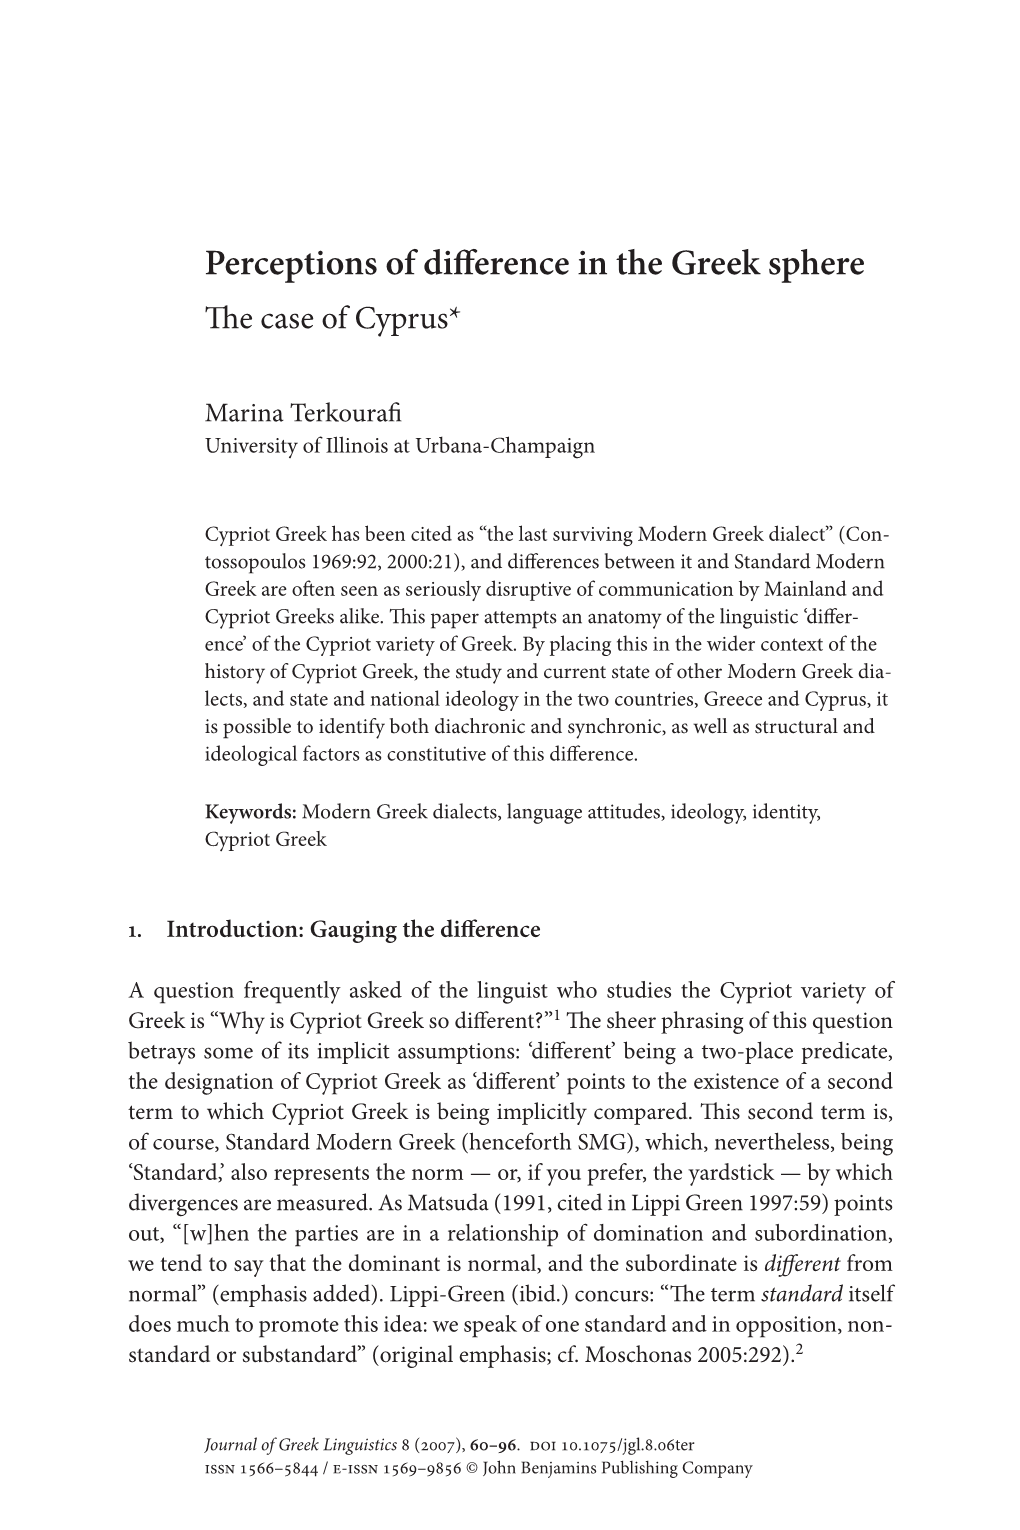 Perceptions of Difference in the Greek Sphere&lt;Br&gt;The Case of Cyprus